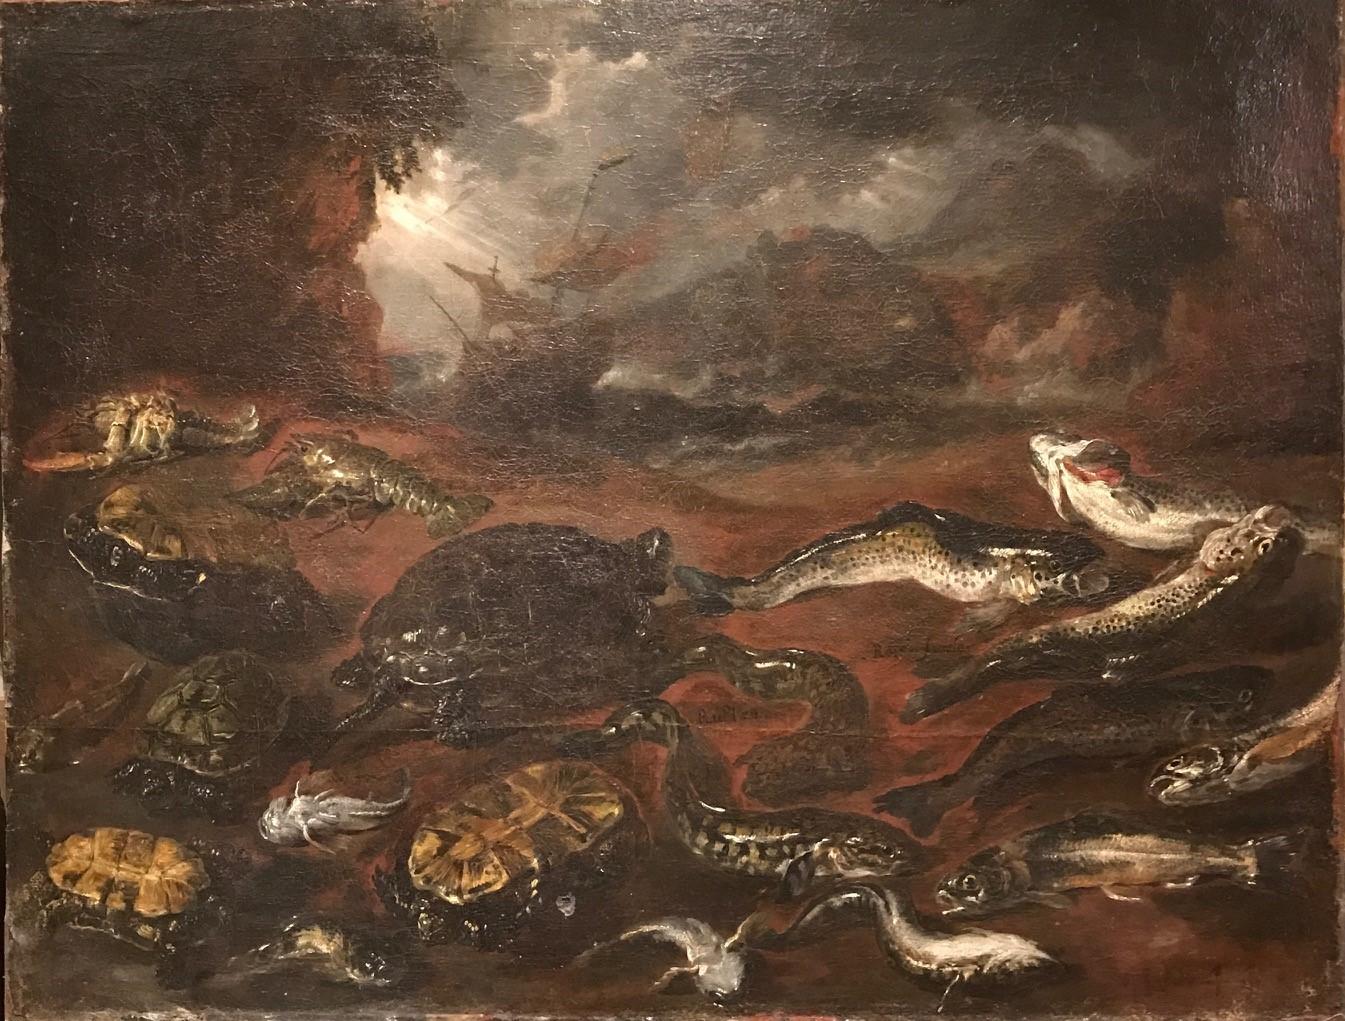 17th Century Oil Painting Still Life: Turtles & Fish with a Ship in Stormy Seas